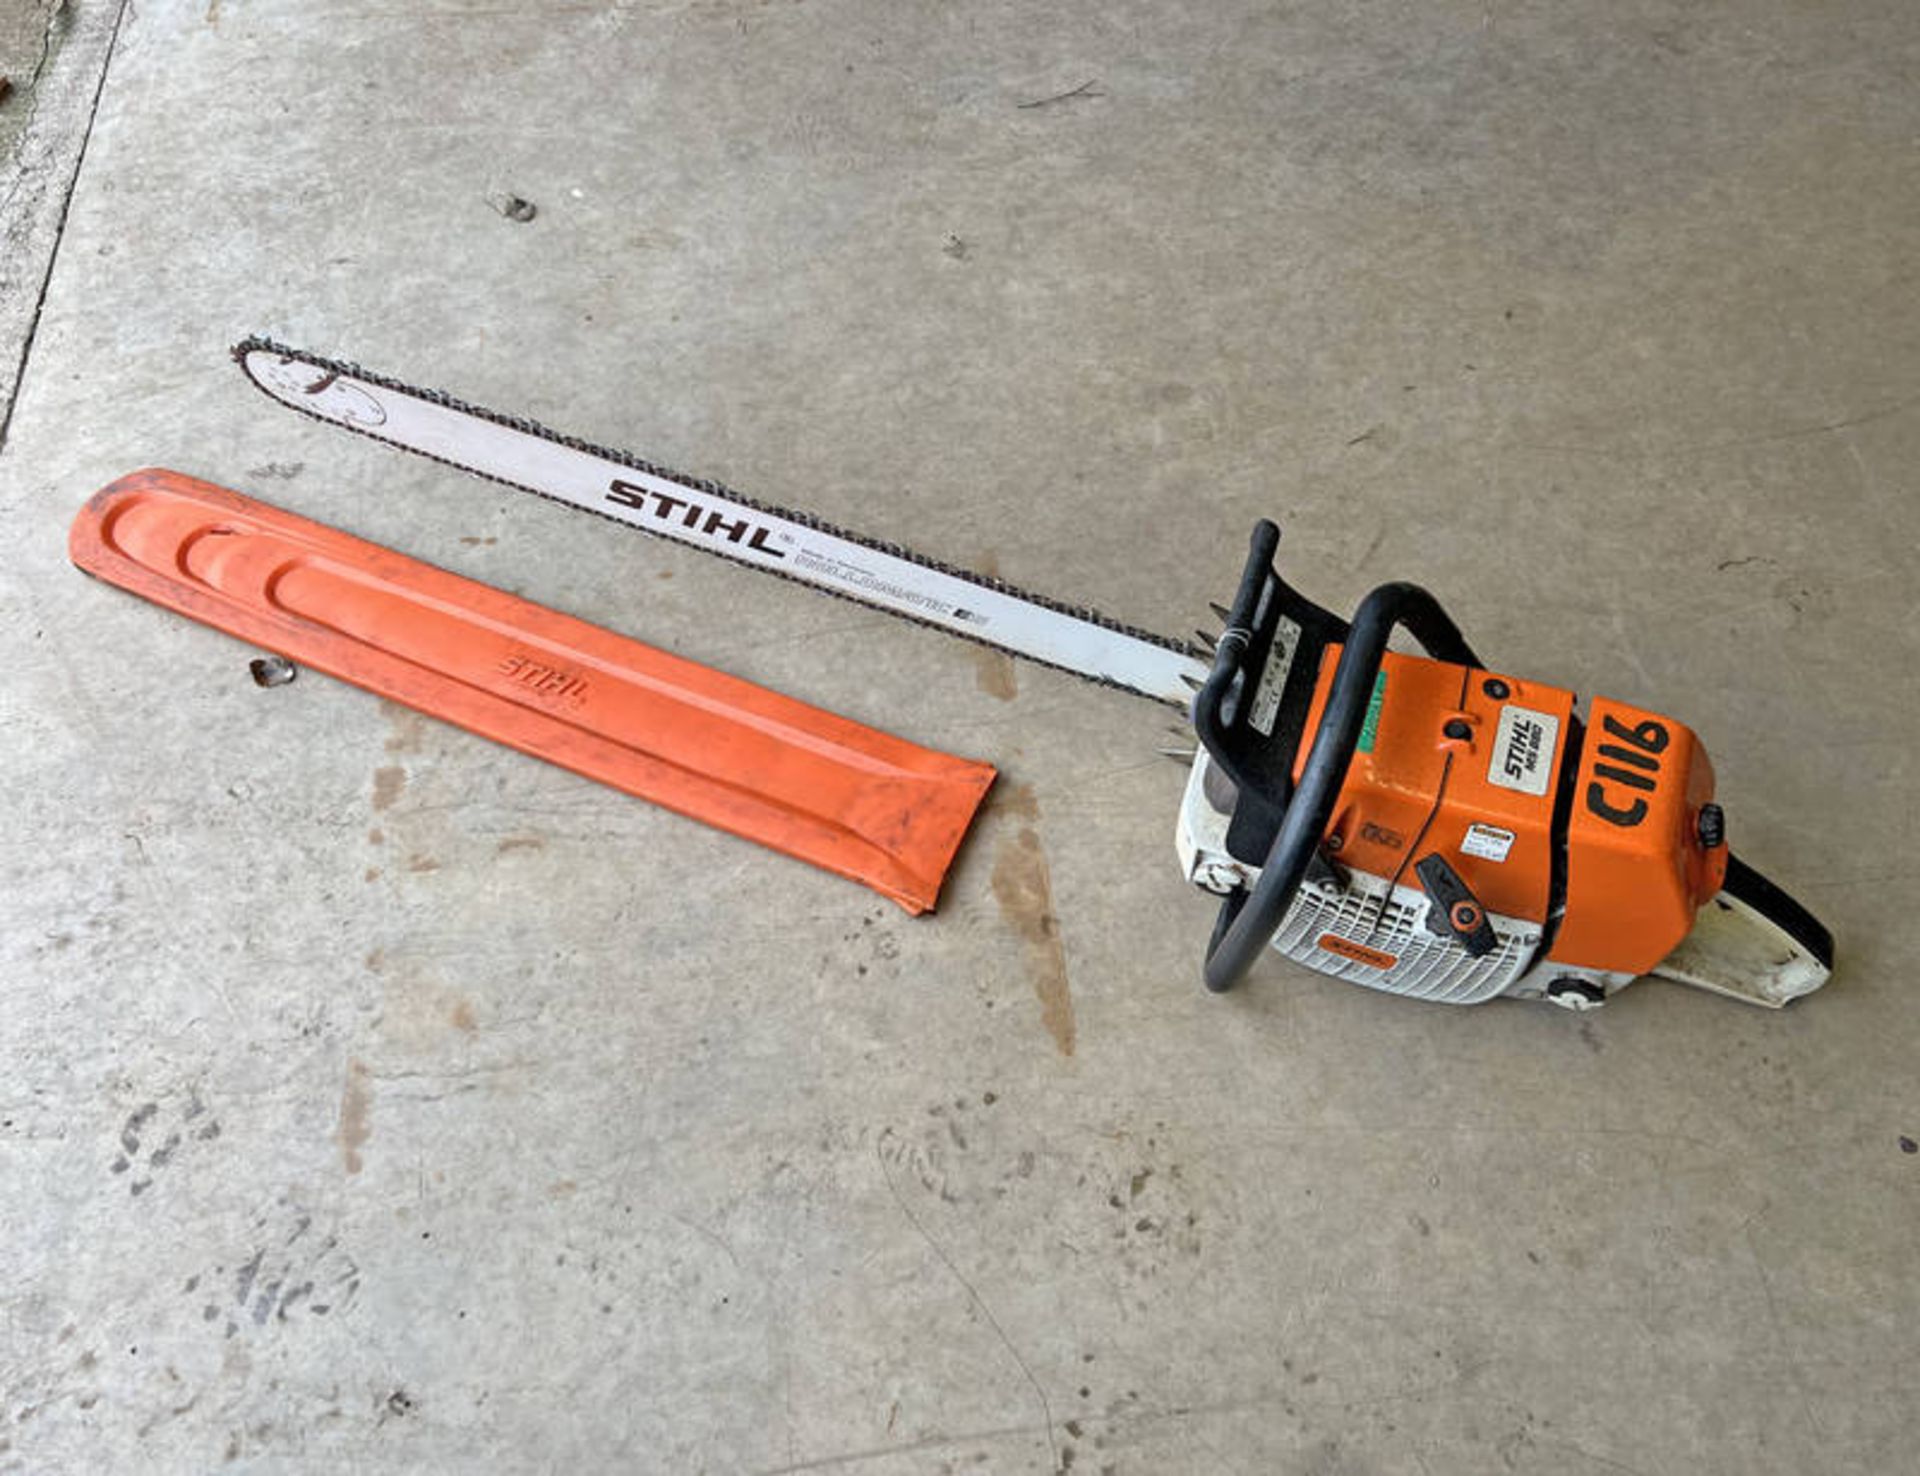 2016 STIHL 36" MS880 CHAINSAW PROFESSIONAL PETROL CHAINSAW WITH 36" BAR **TO BE SOLD PLUS VAT ON